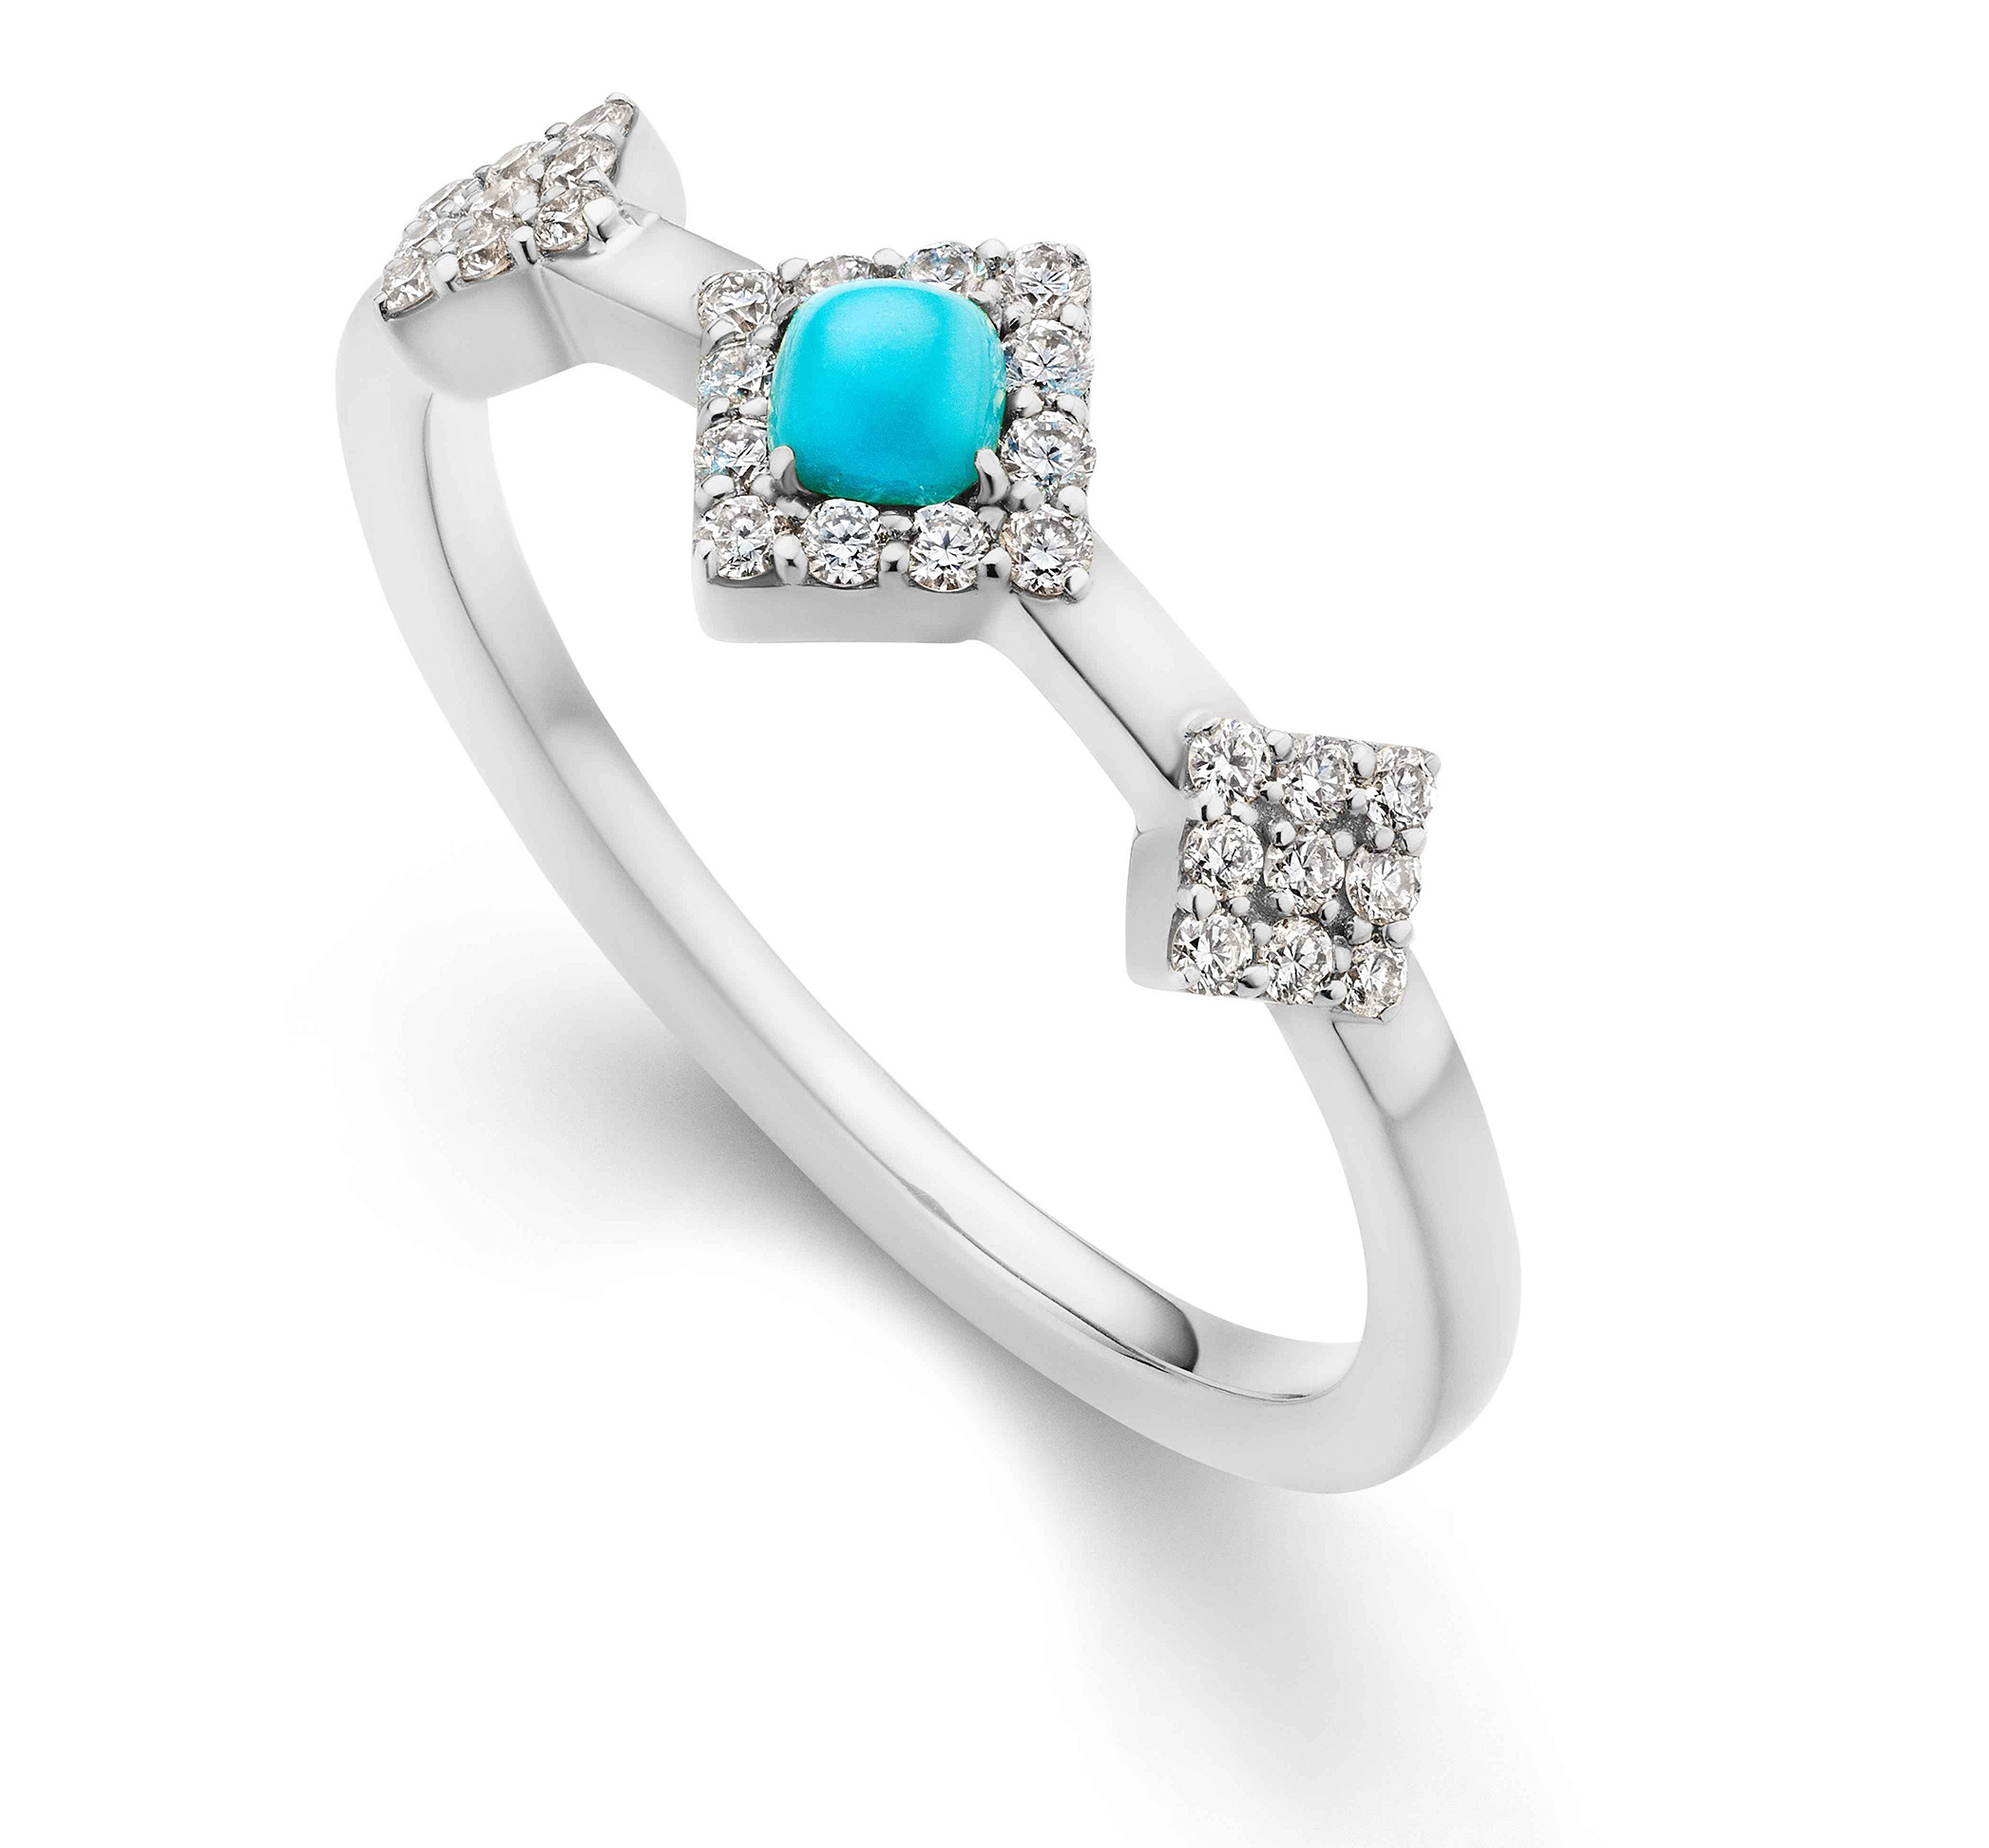 Denali Center Stackable Diamond and Turquoise Ring in White Gold, by Karina Brez